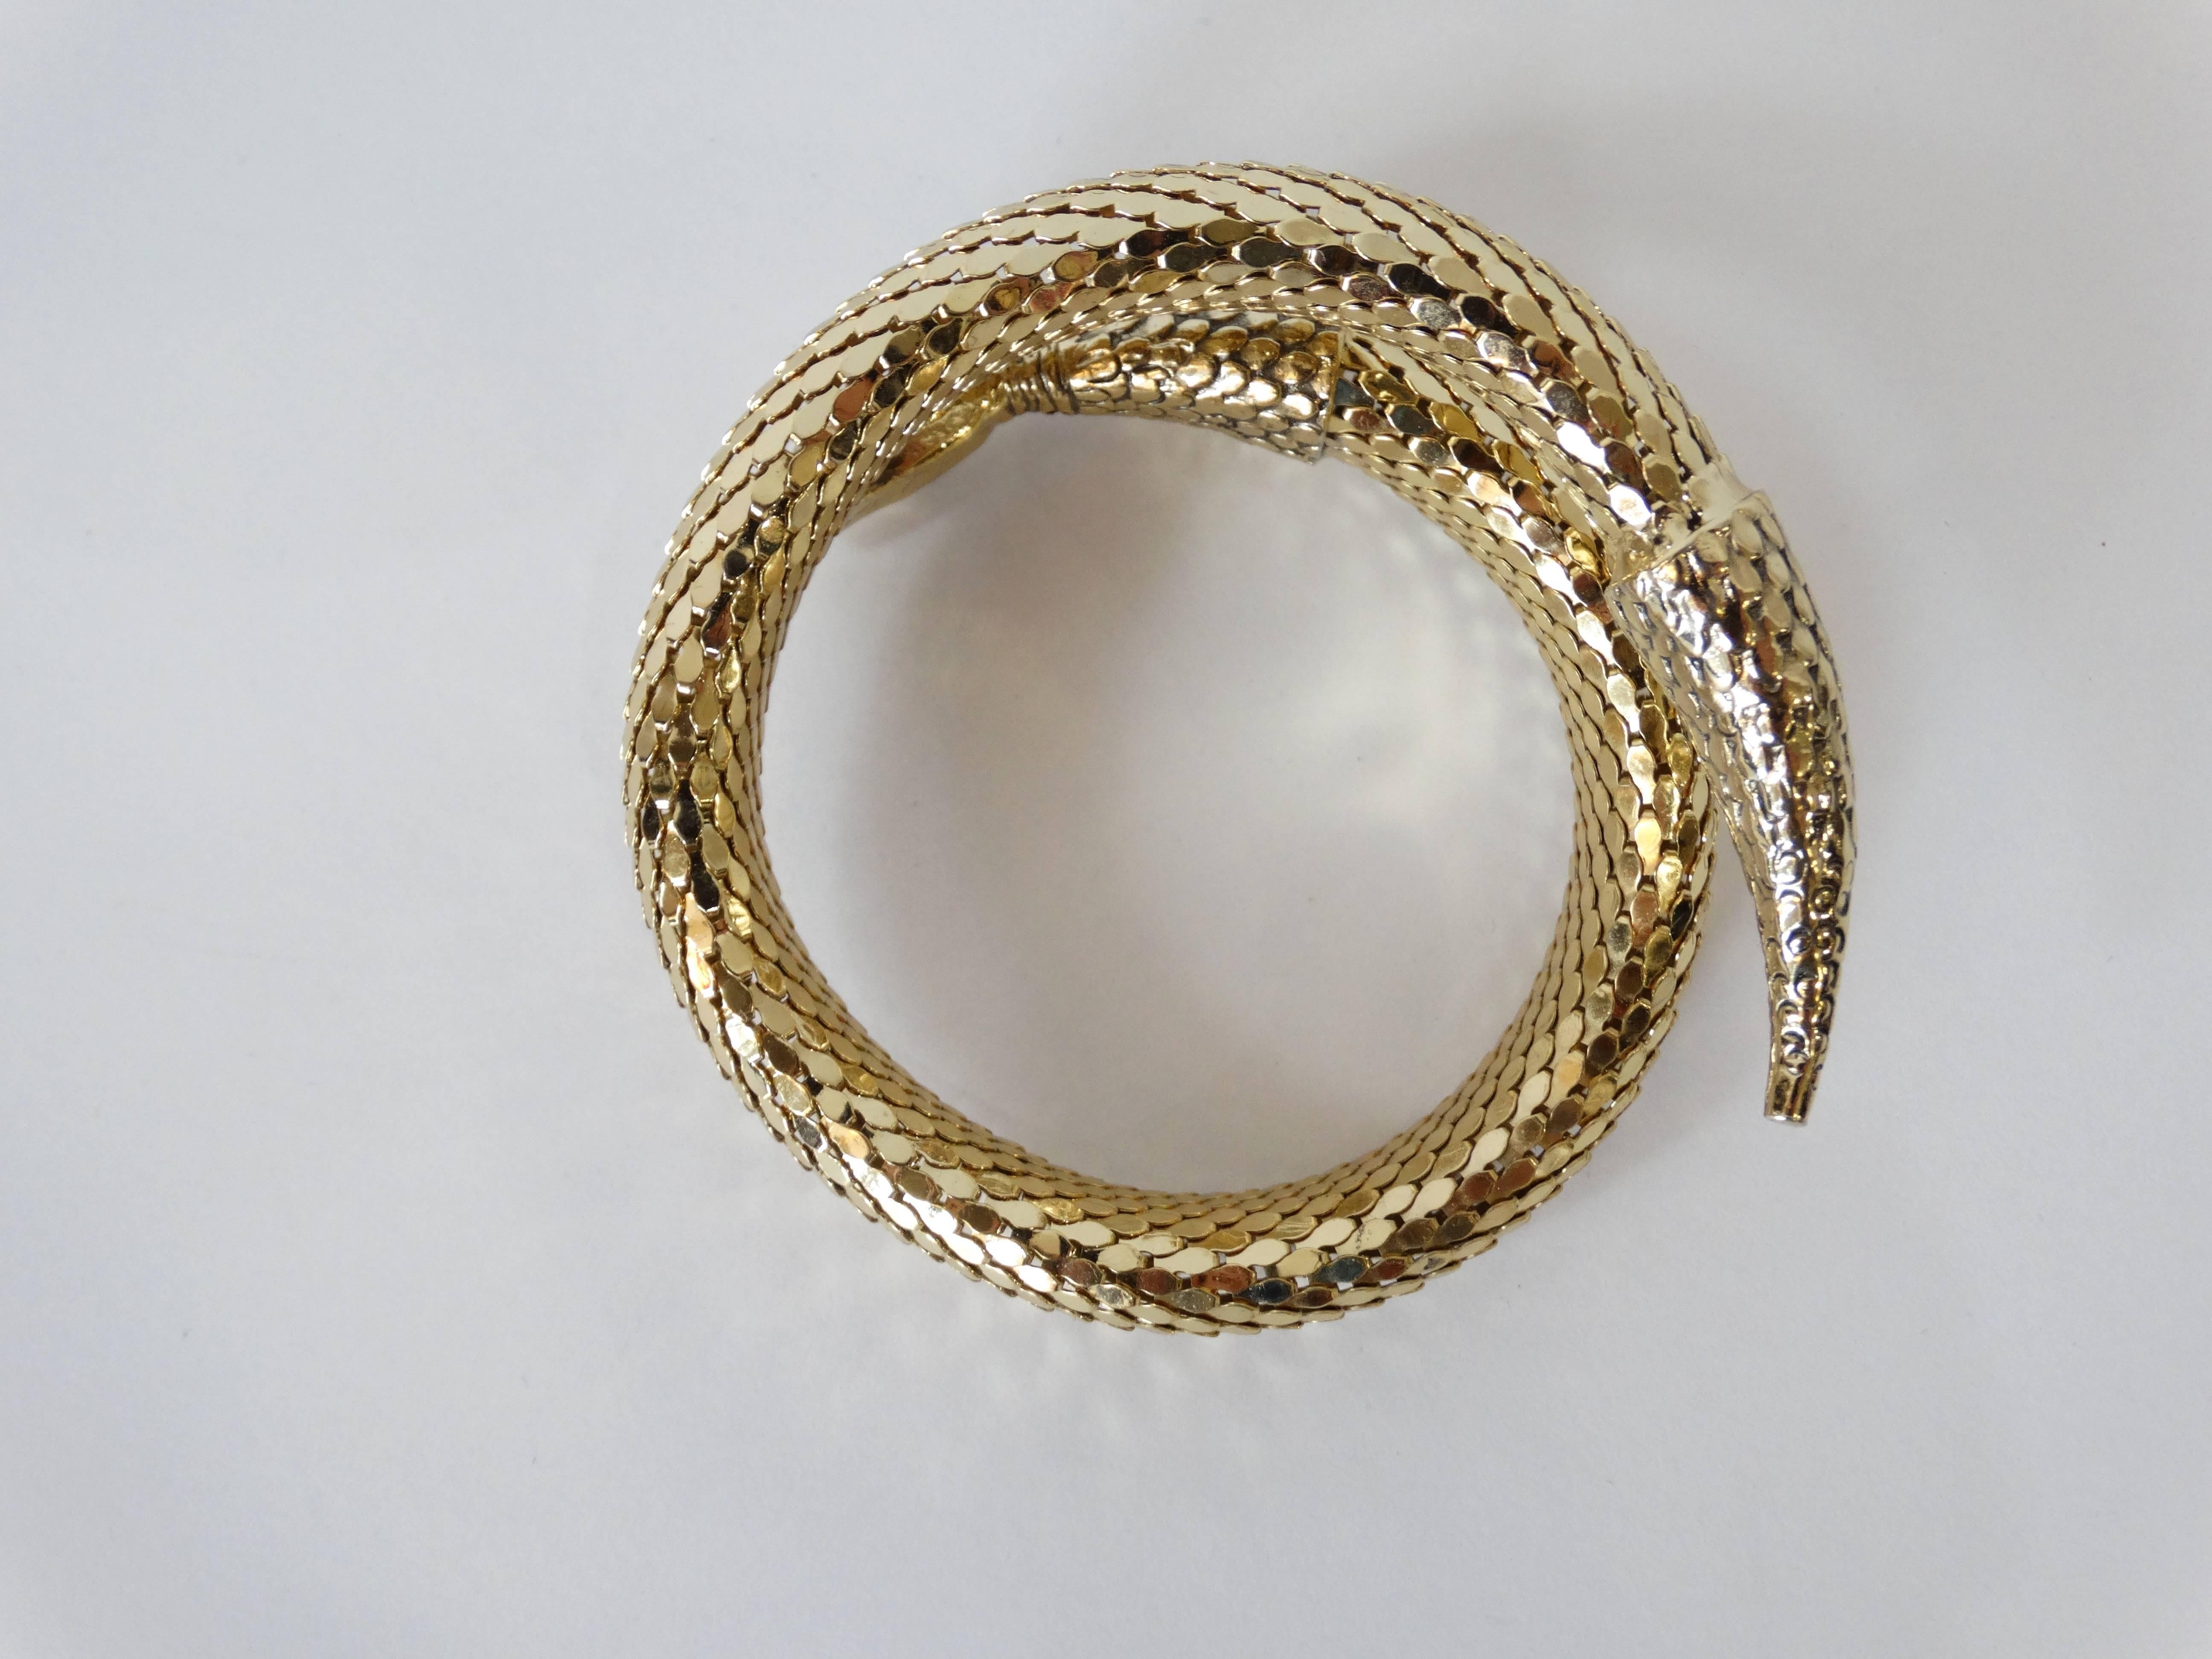 1970's coiled snake bracelet from Whiting and Davis. It is made out of Whiting and Davis' signature gold-chain-mail mesh. It measures 1.5